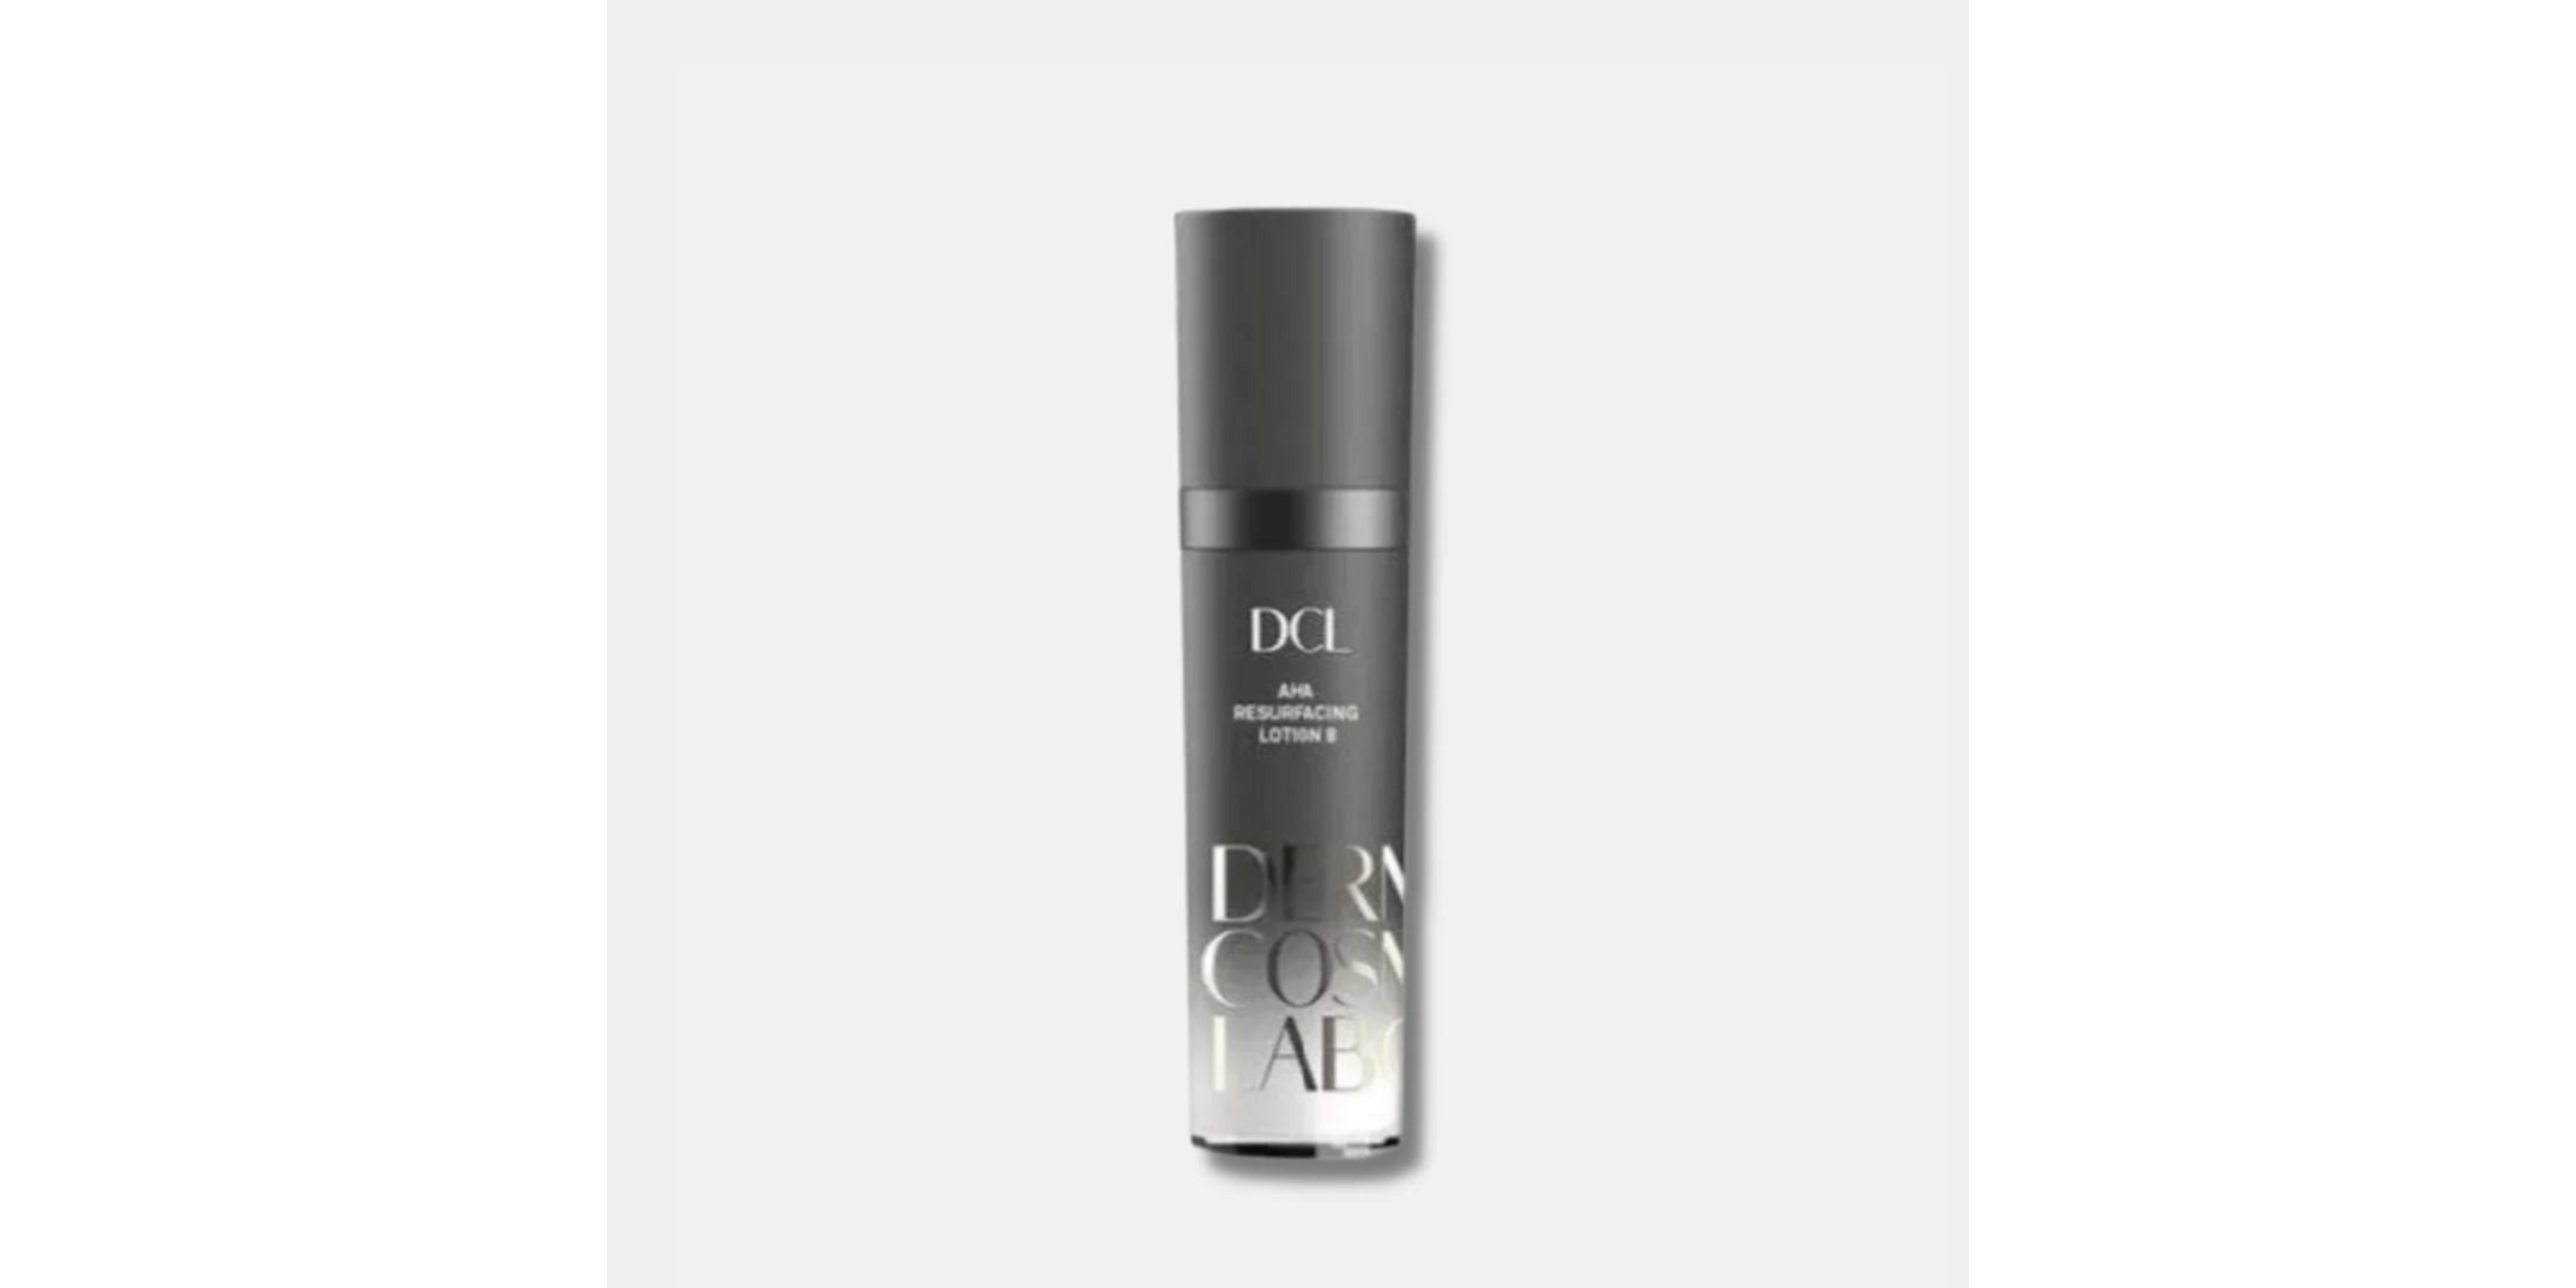 The Pros and Cons of DCL SKINCARE Aha Resurfacing Lotion 8: A Skincare Review